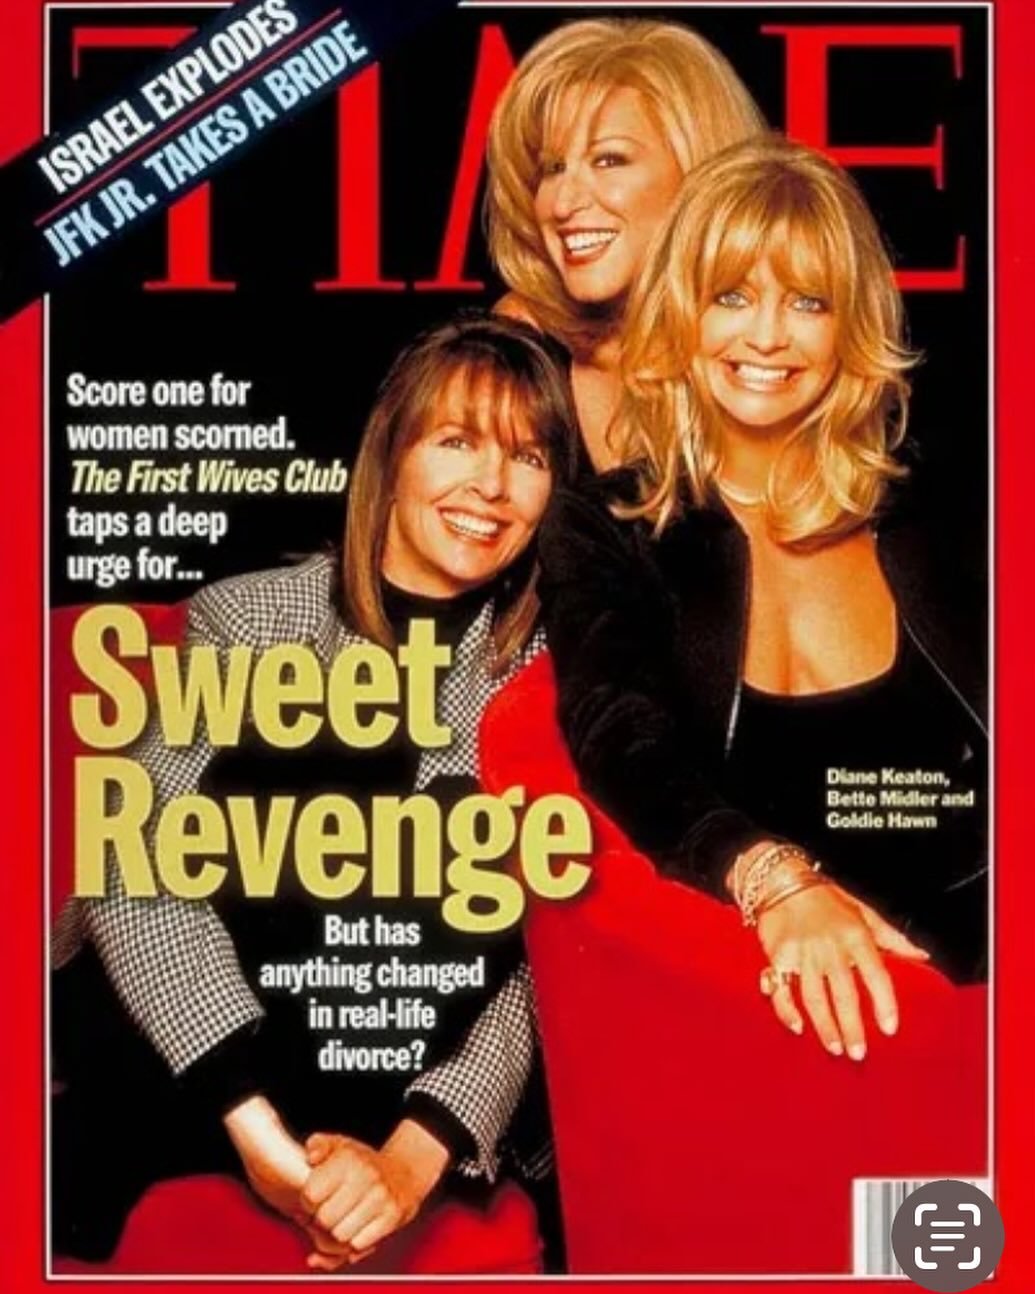 It&rsquo;s TIME to get revenge! Isn&rsquo;t this TIME magazine cover of these 3 icons gorgeous! 

See you on Friday for an iconic evening celebrating The First Wives Club with a full screening at @visitfeelgoodclub with 3 of our city&rsquo;s fave dra